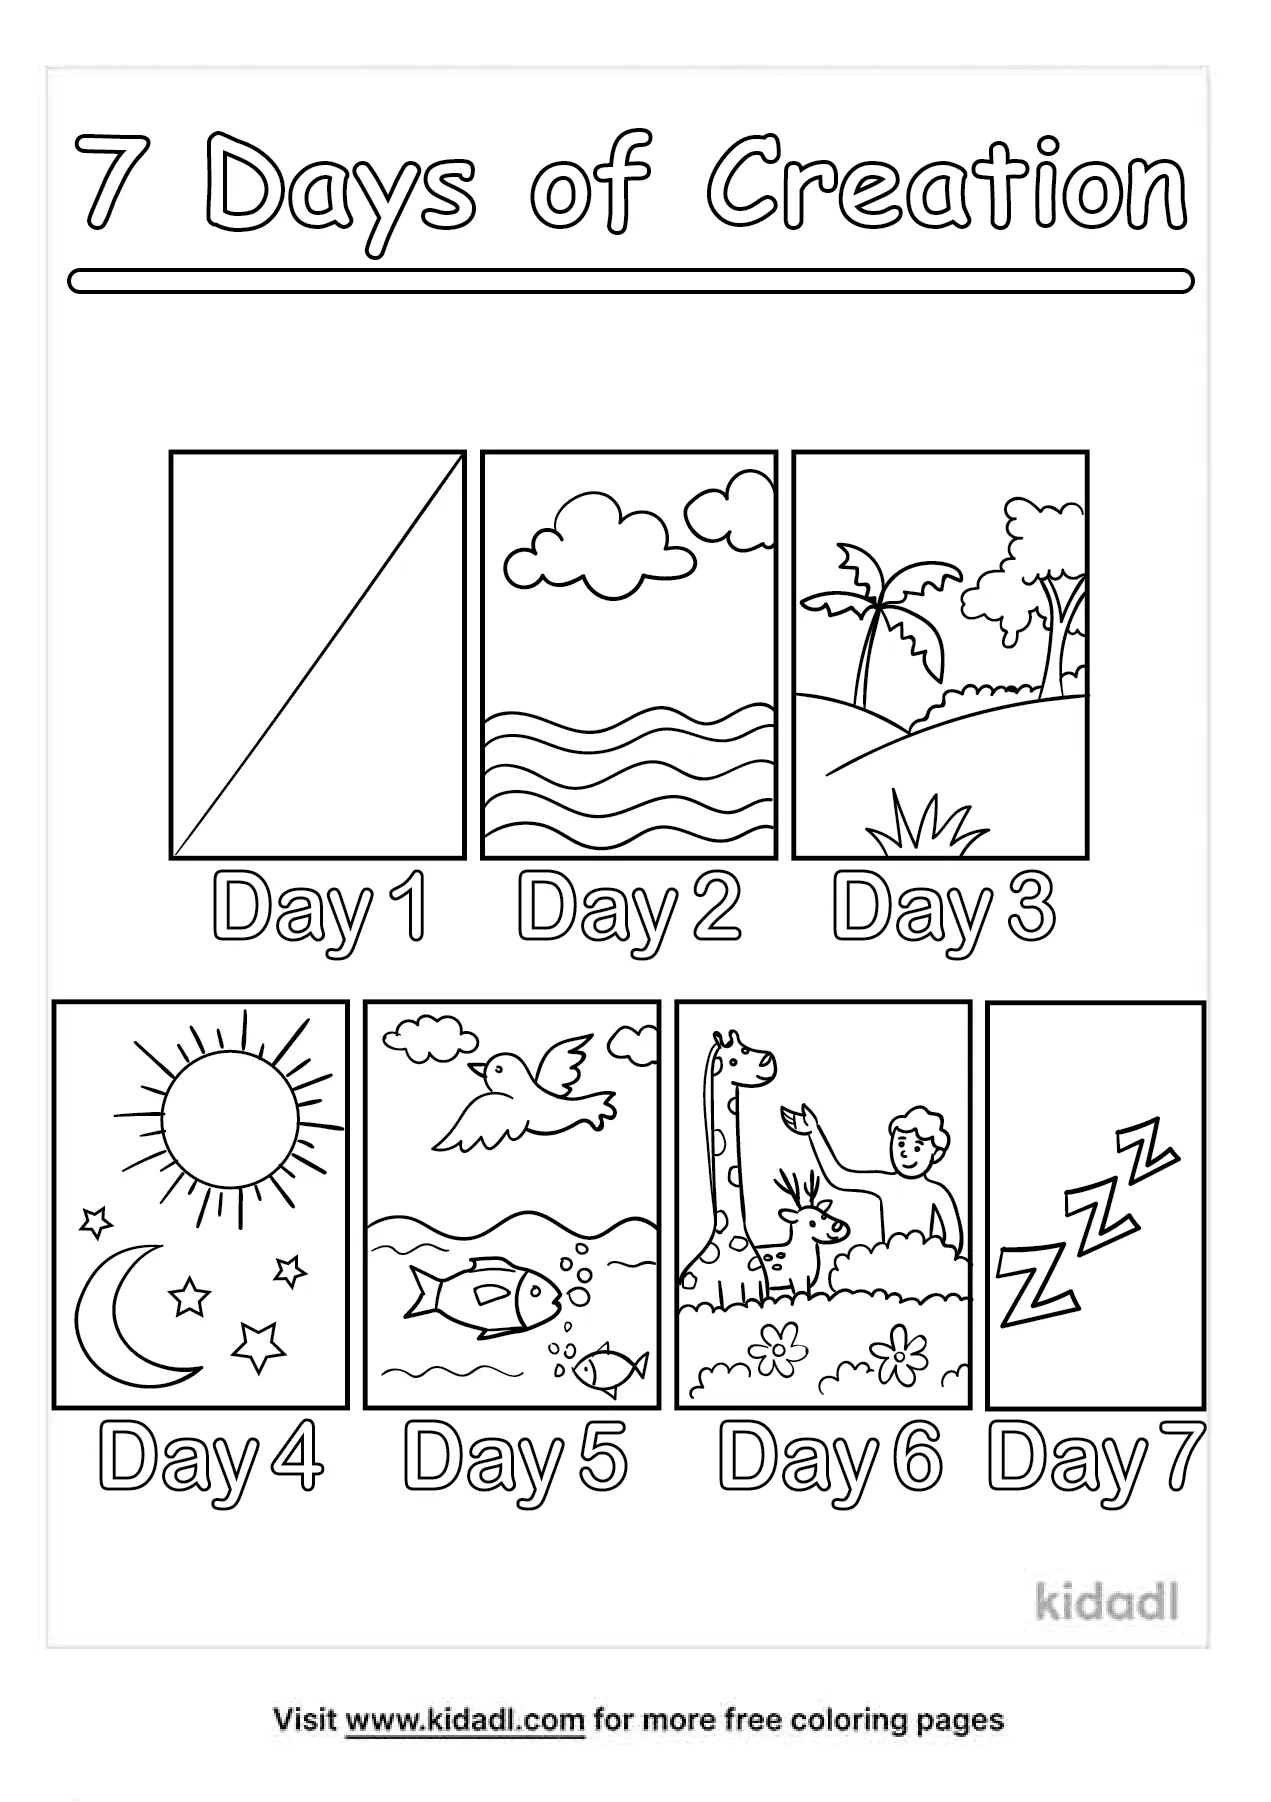 20 Days Of Creation Coloring Pages   Free Bible Coloring Pages   Kidadl